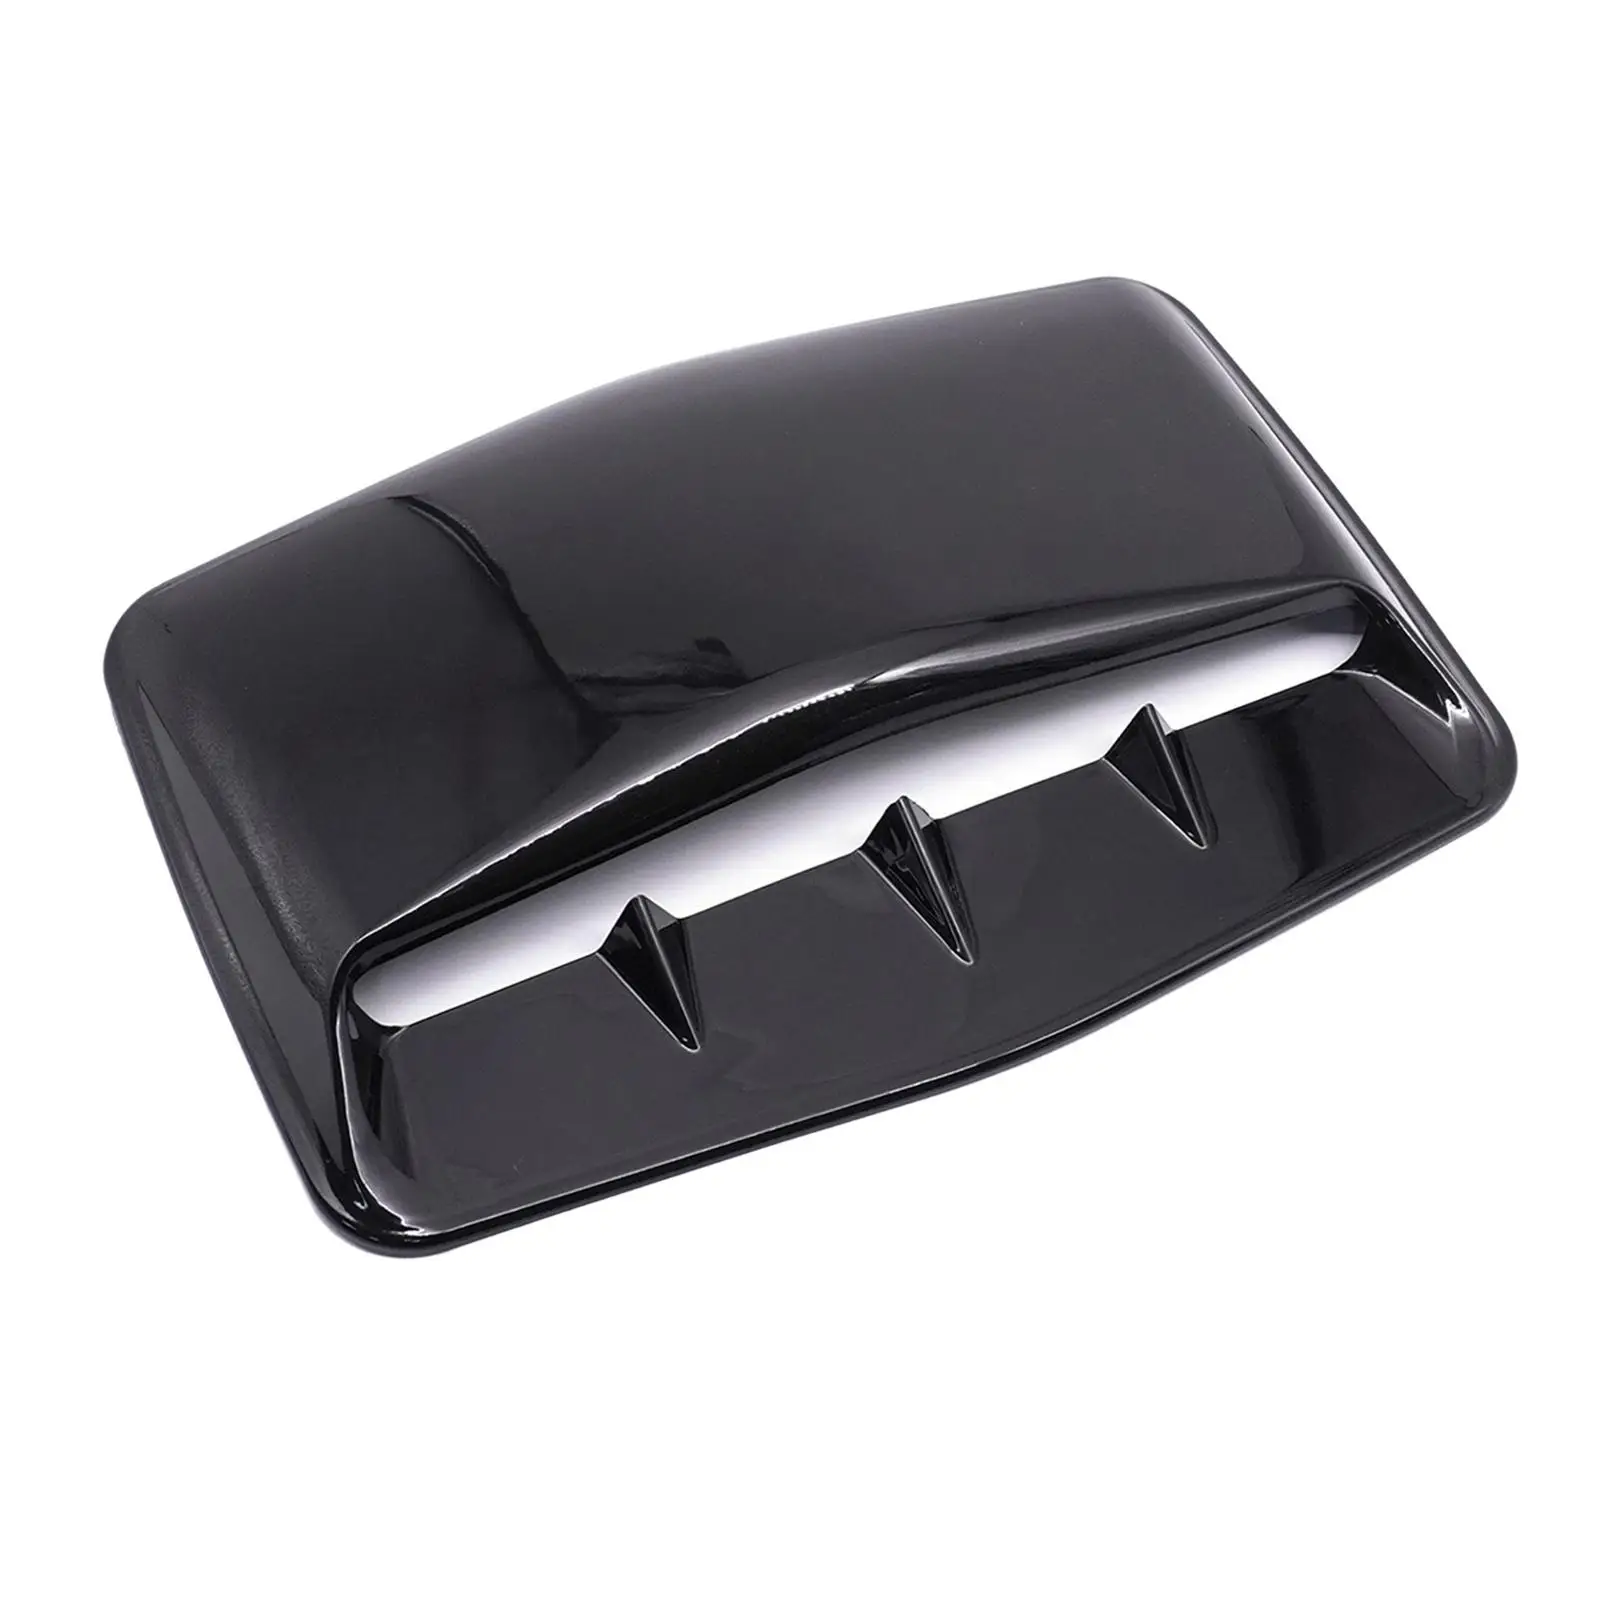 Universal Car Hood Vent Air Vent Cover Air Flow Intake Cover Fit for Car